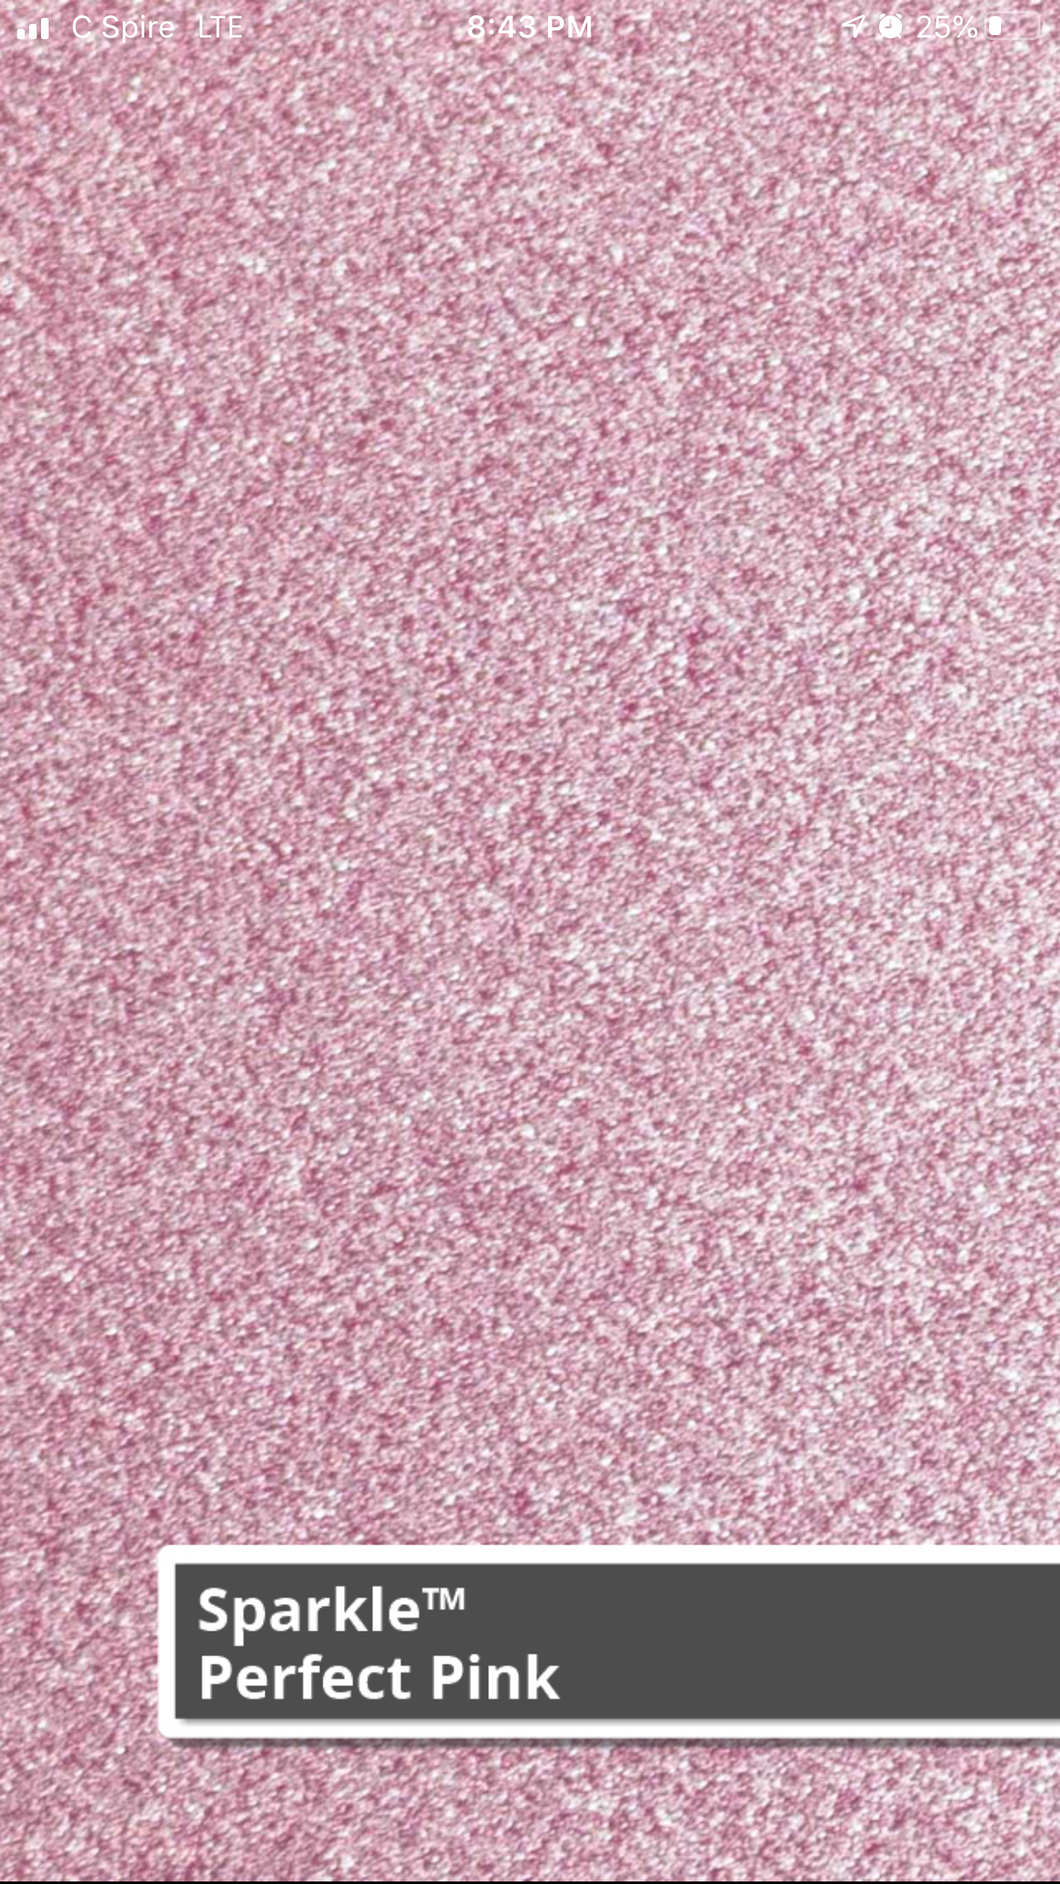 Siser Sparkle (Perfect Pink)